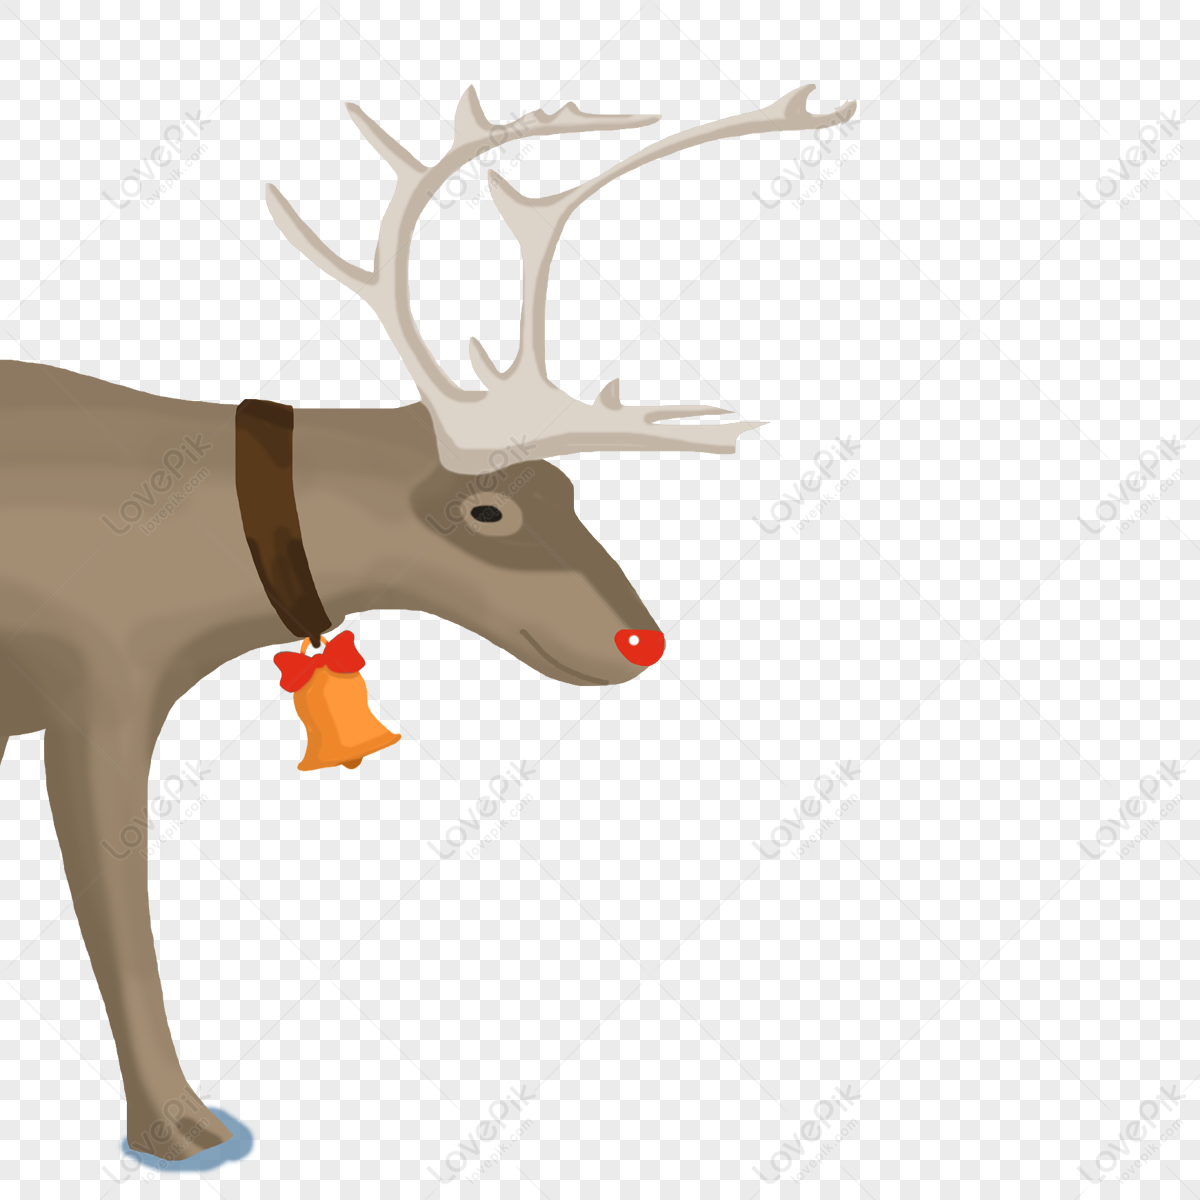 Christmas brushes 1, deer sketch on side view, png | PNGEgg